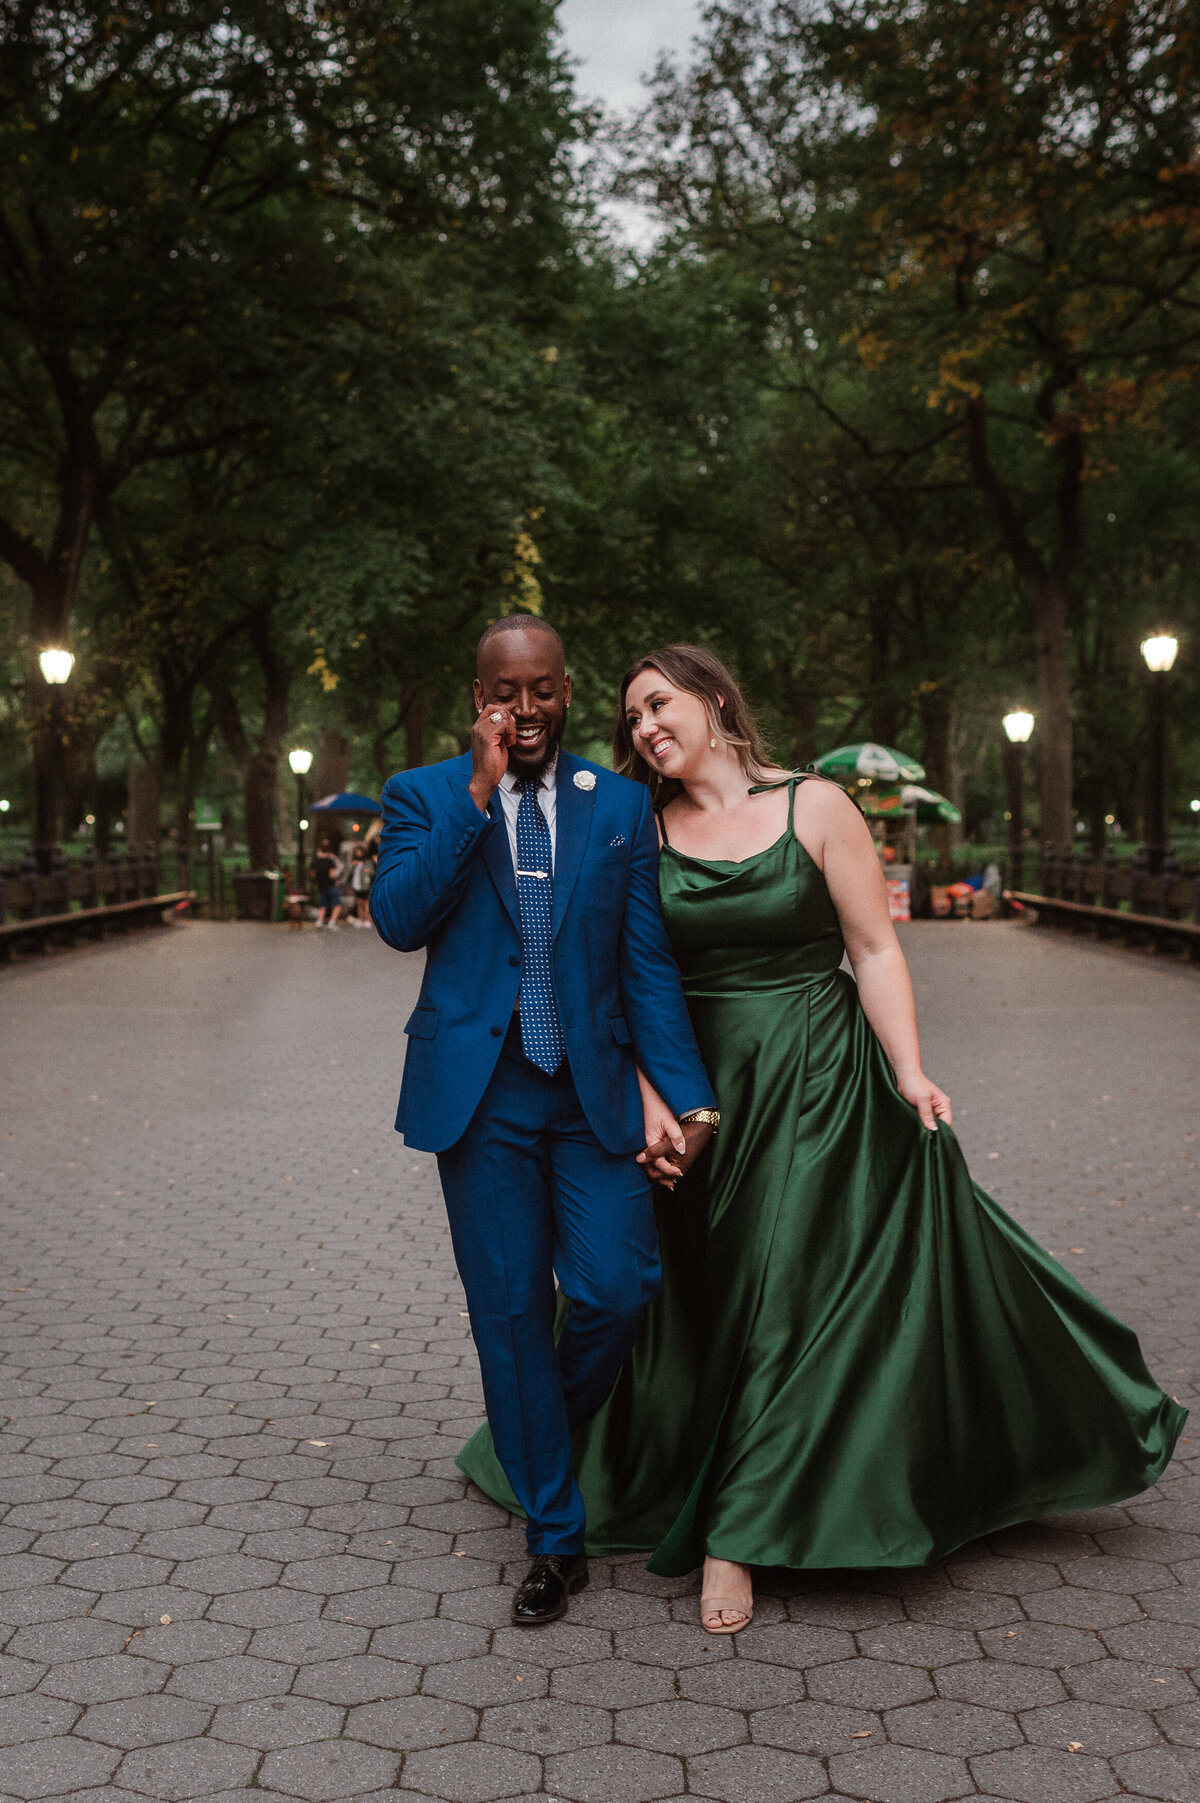 central-park-engagement-photos-by-suess-moments-wedding-photographer-nj-nyc (11 of 14)